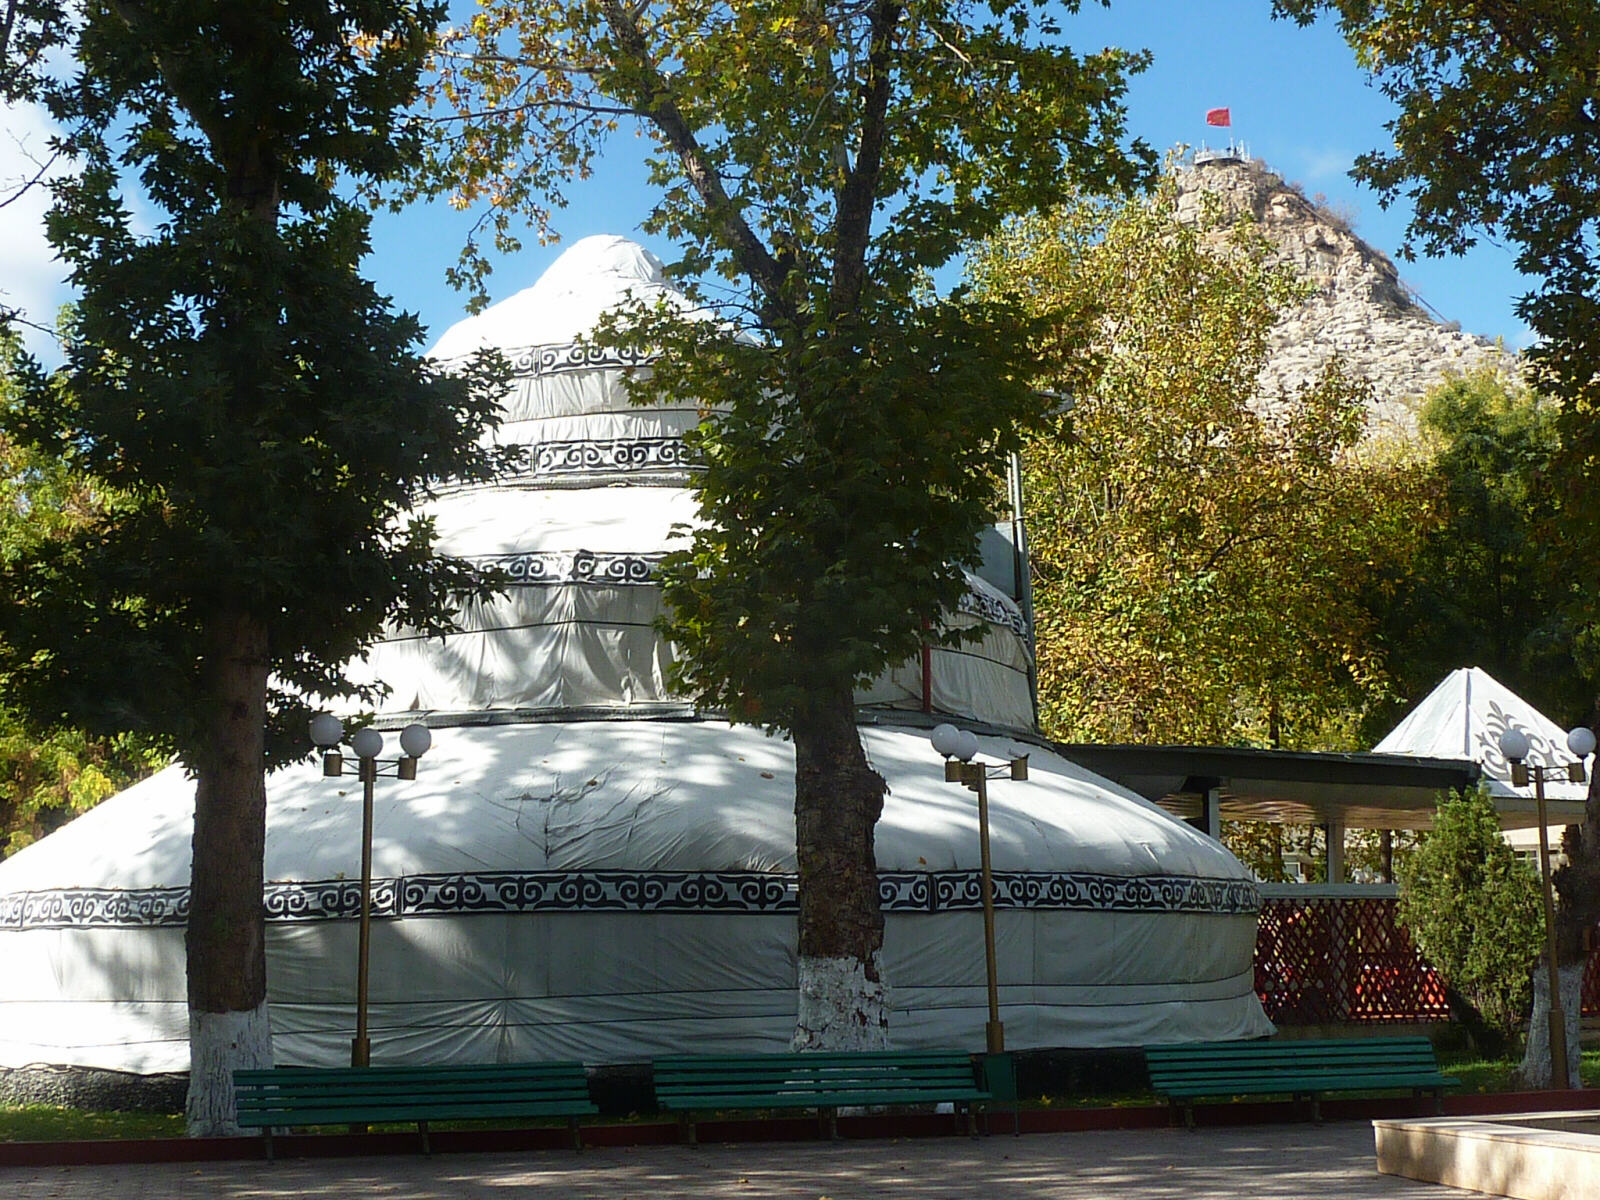 A large yurt museum in Osh, Kyrgyzstan